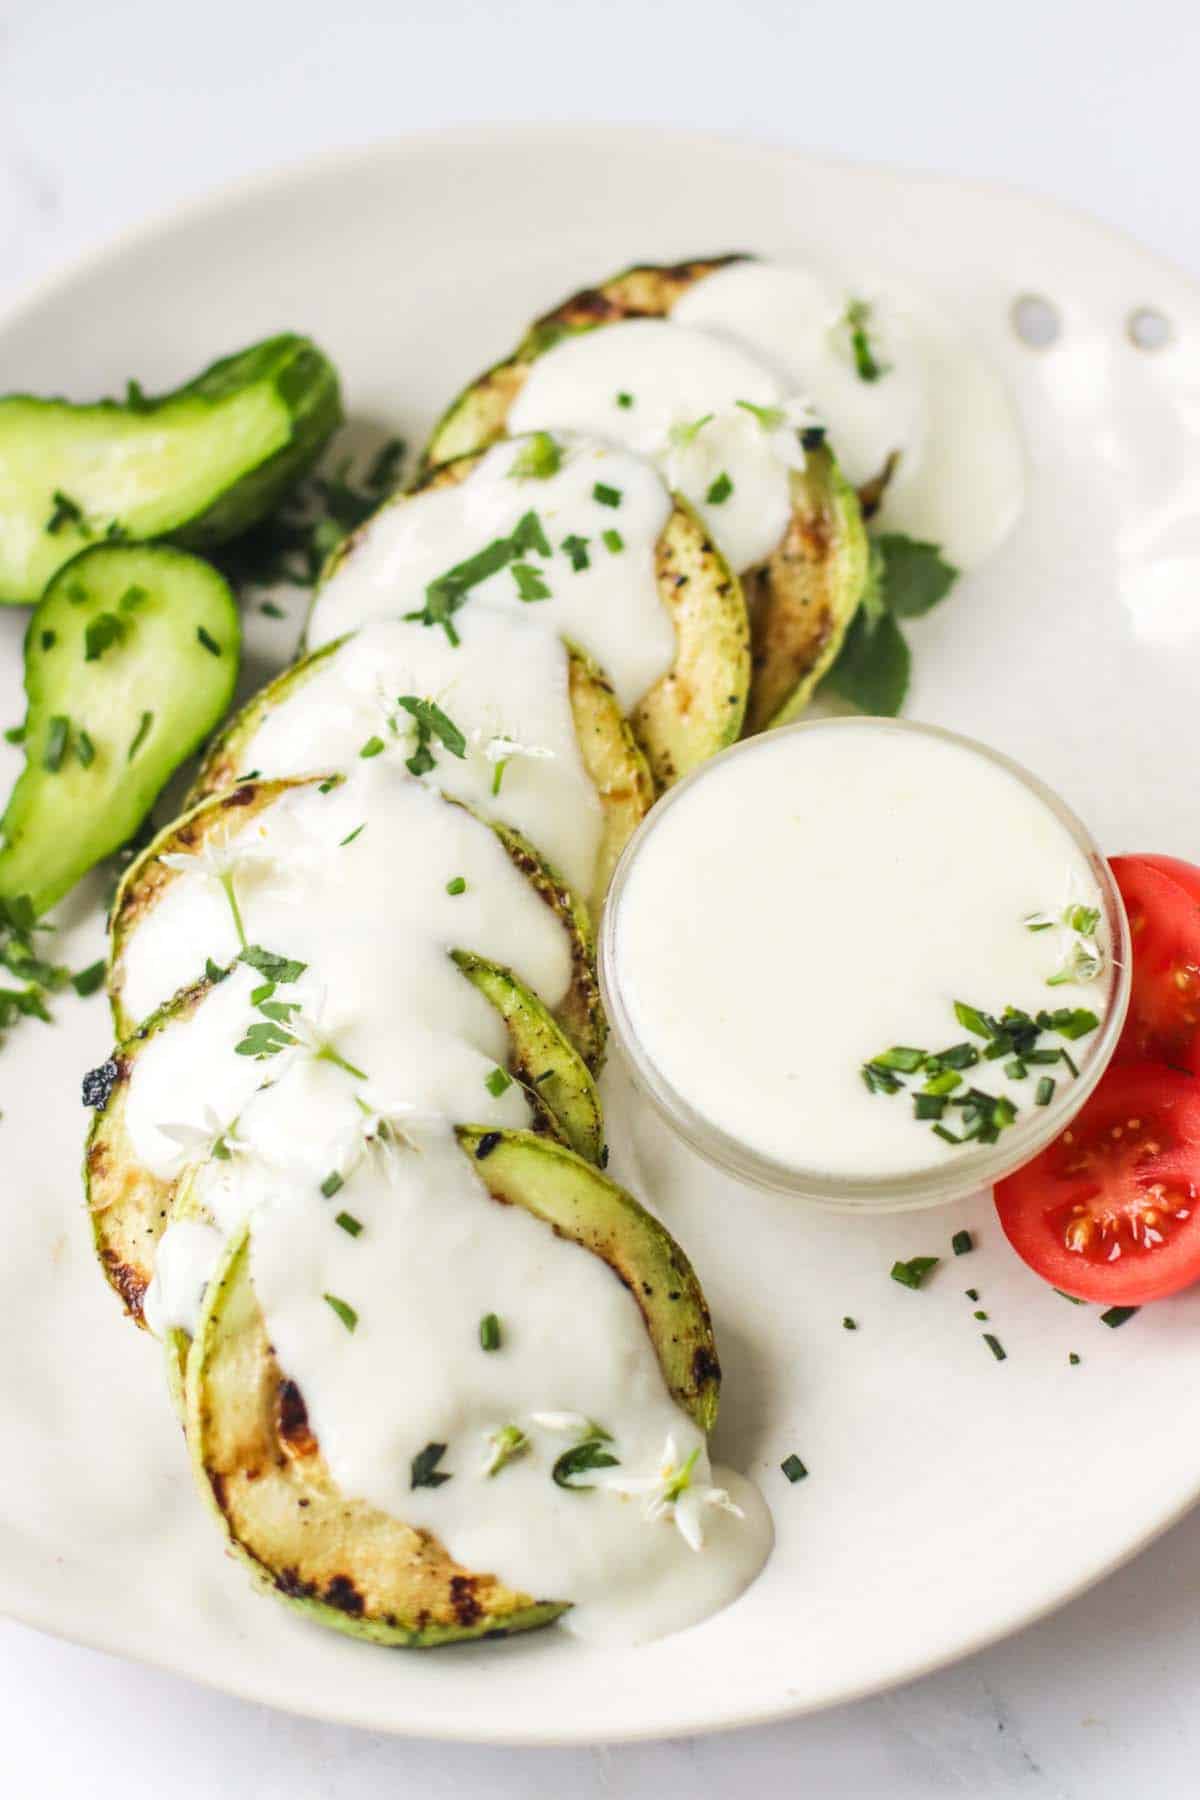 Cheese sauce in a bowl set on a white plate and drizzled over grilled zucchini.